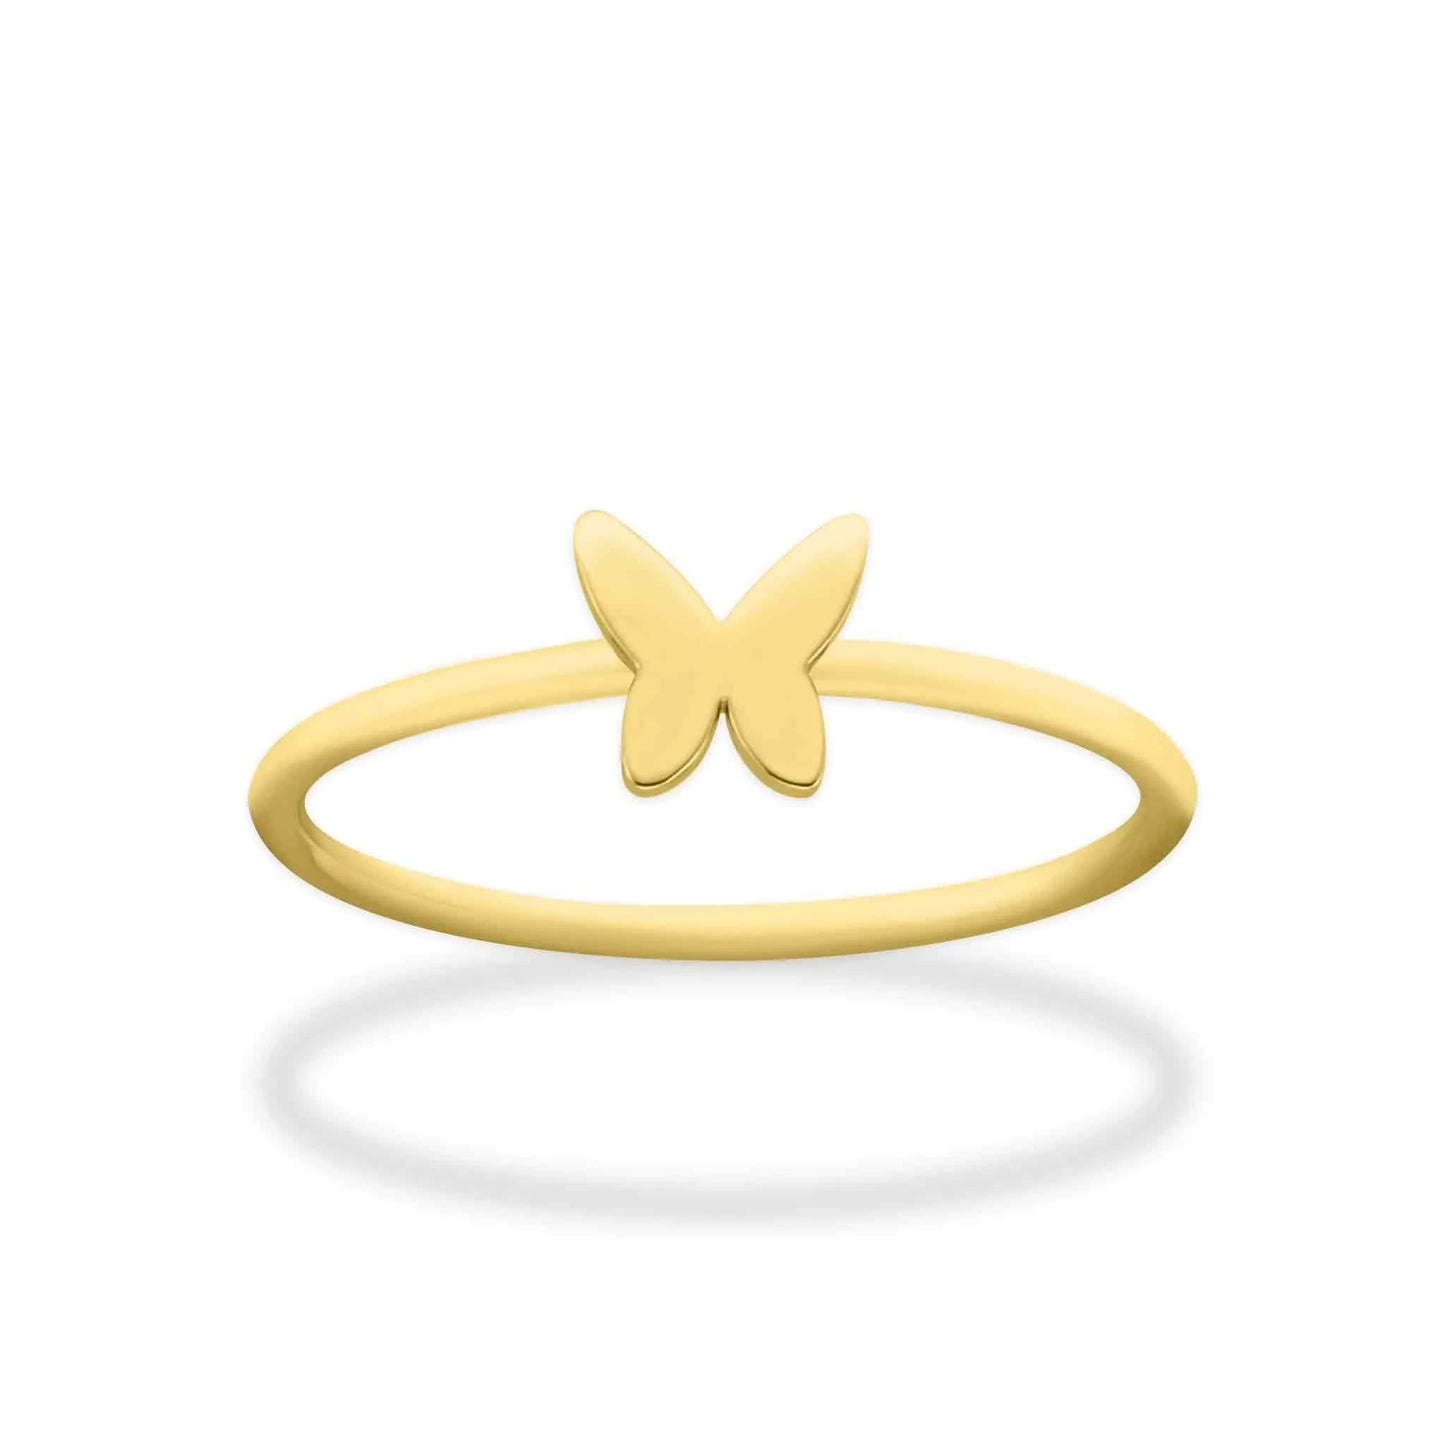 Dainty Love Shape Stackable Rings in Gold - CinloCo